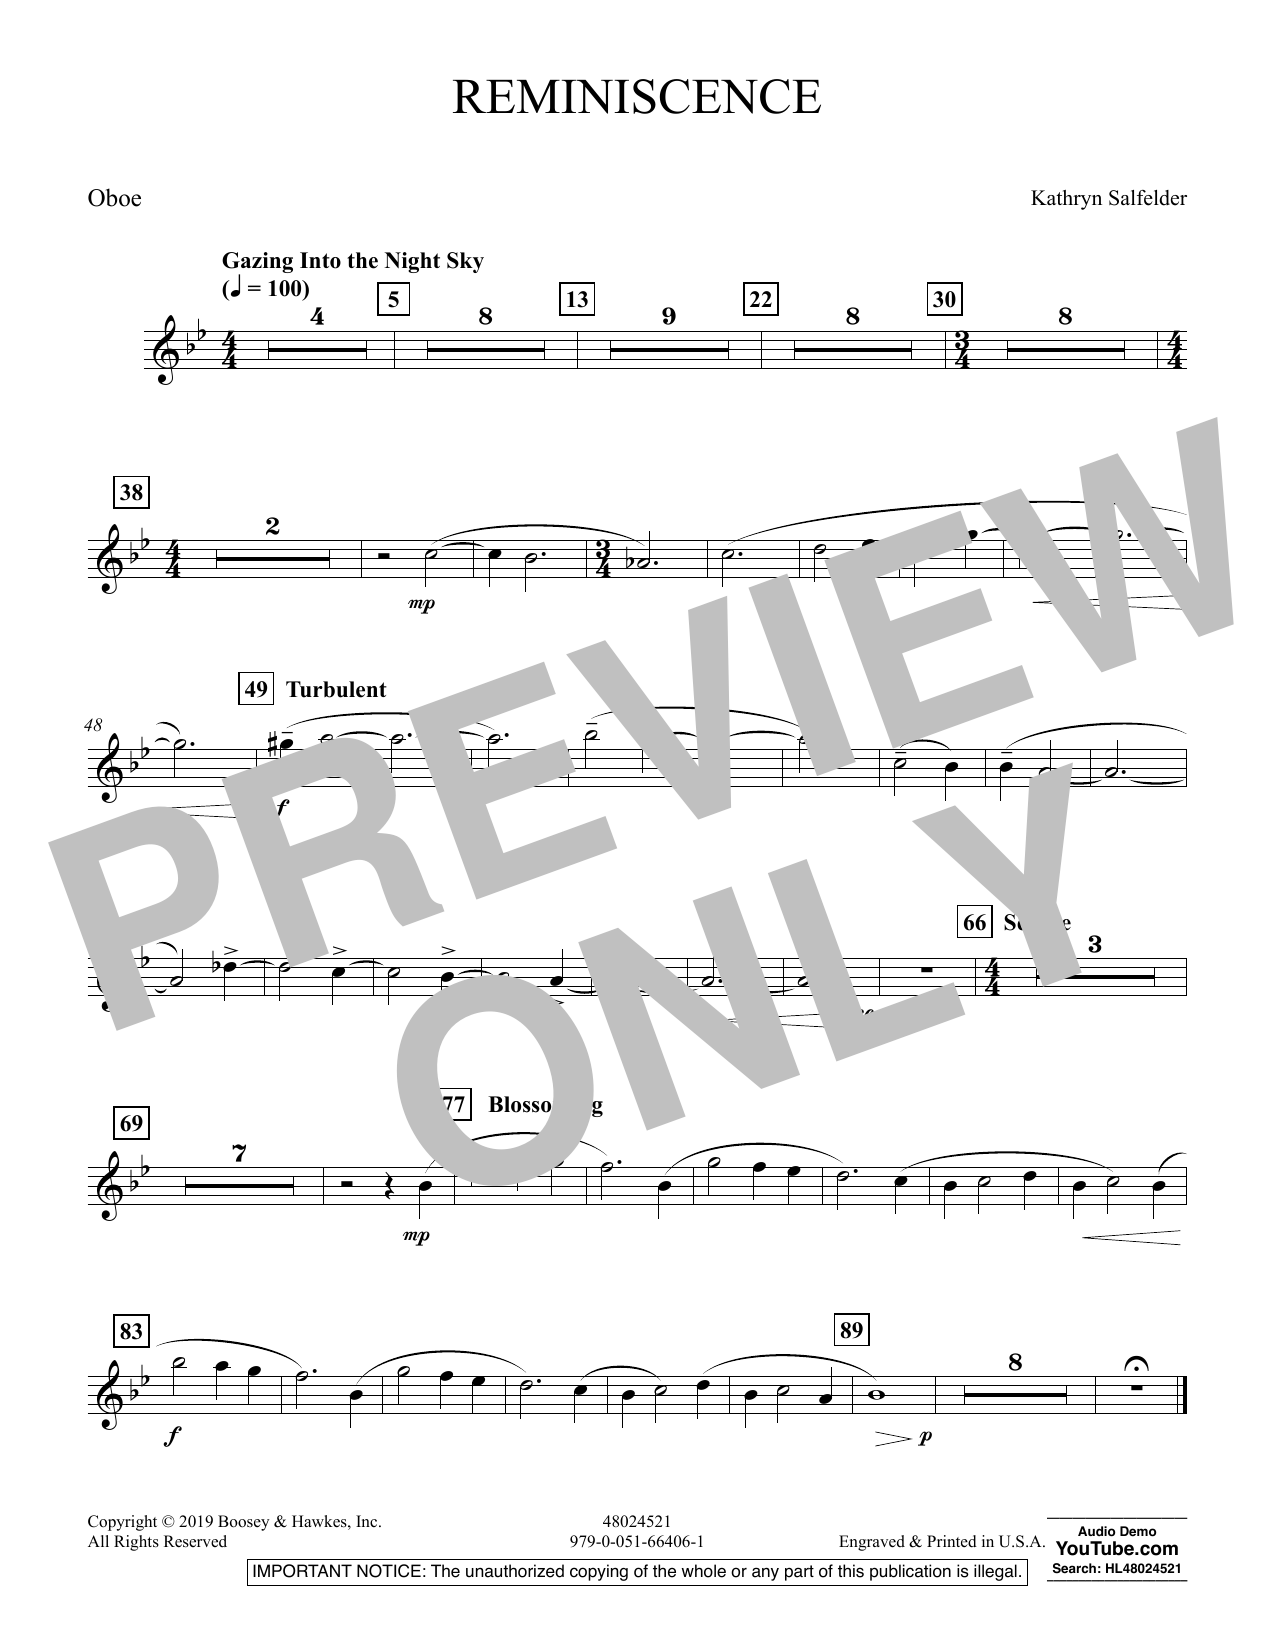 Kathryn Salfelder Reminiscence - Oboe sheet music preview music notes and score for Concert Band including 1 page(s)